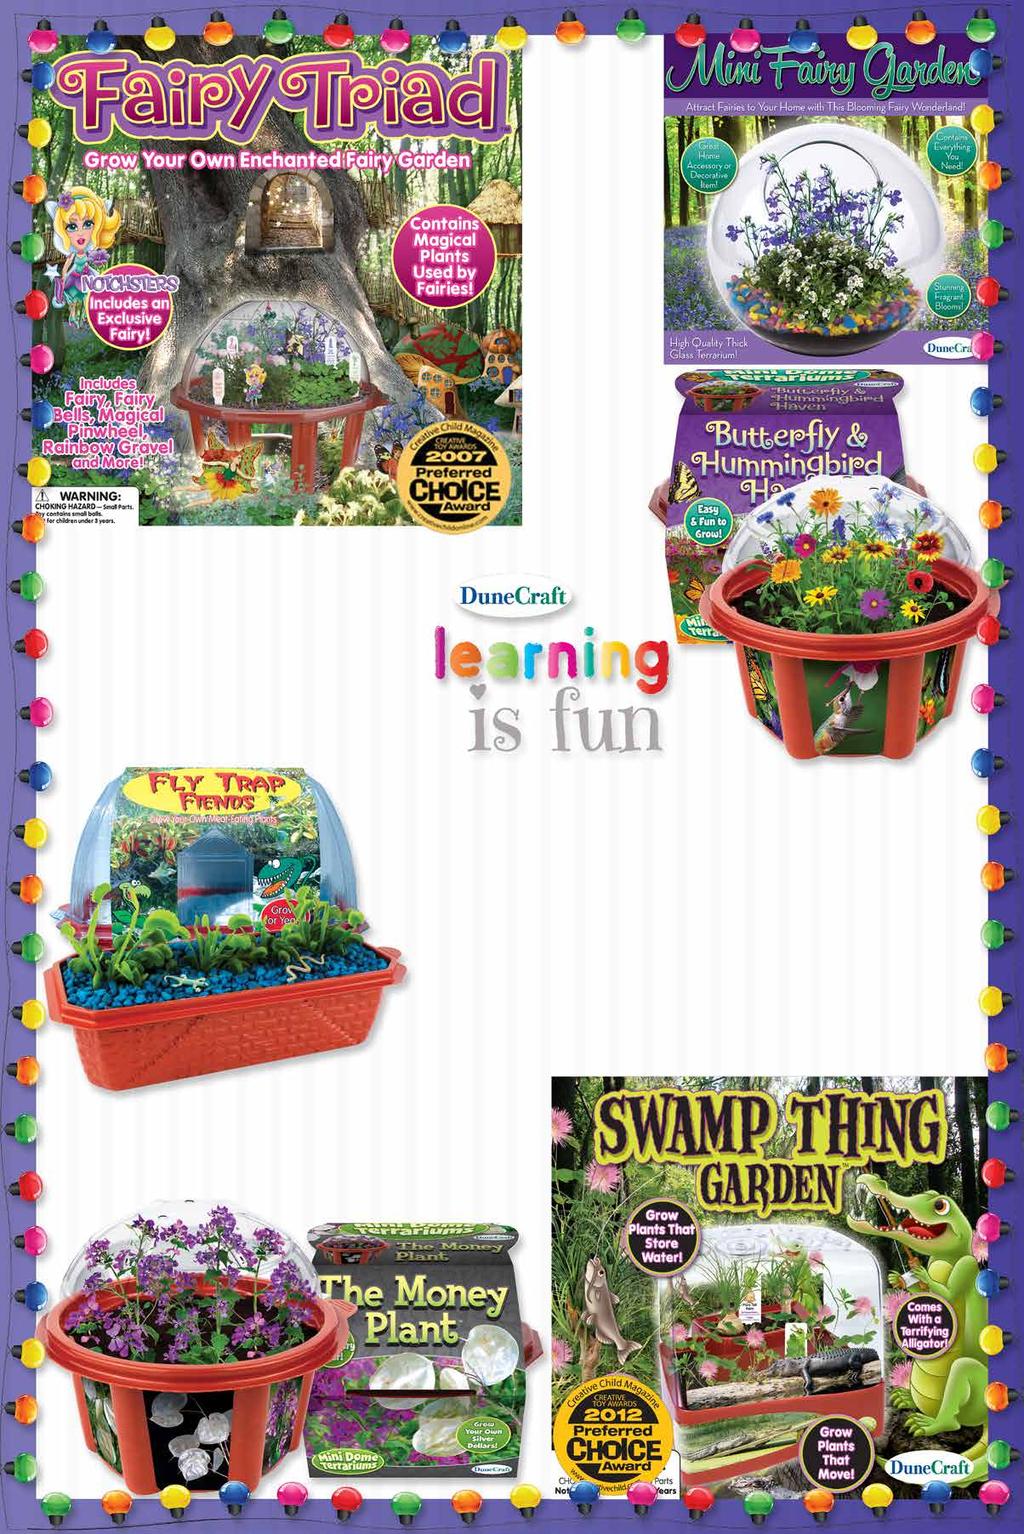 26 8001 $16.00 Mini Fairy Garden There is nothing as simple and alive as glass terraniums. They are fun to look at and even help clean the air!